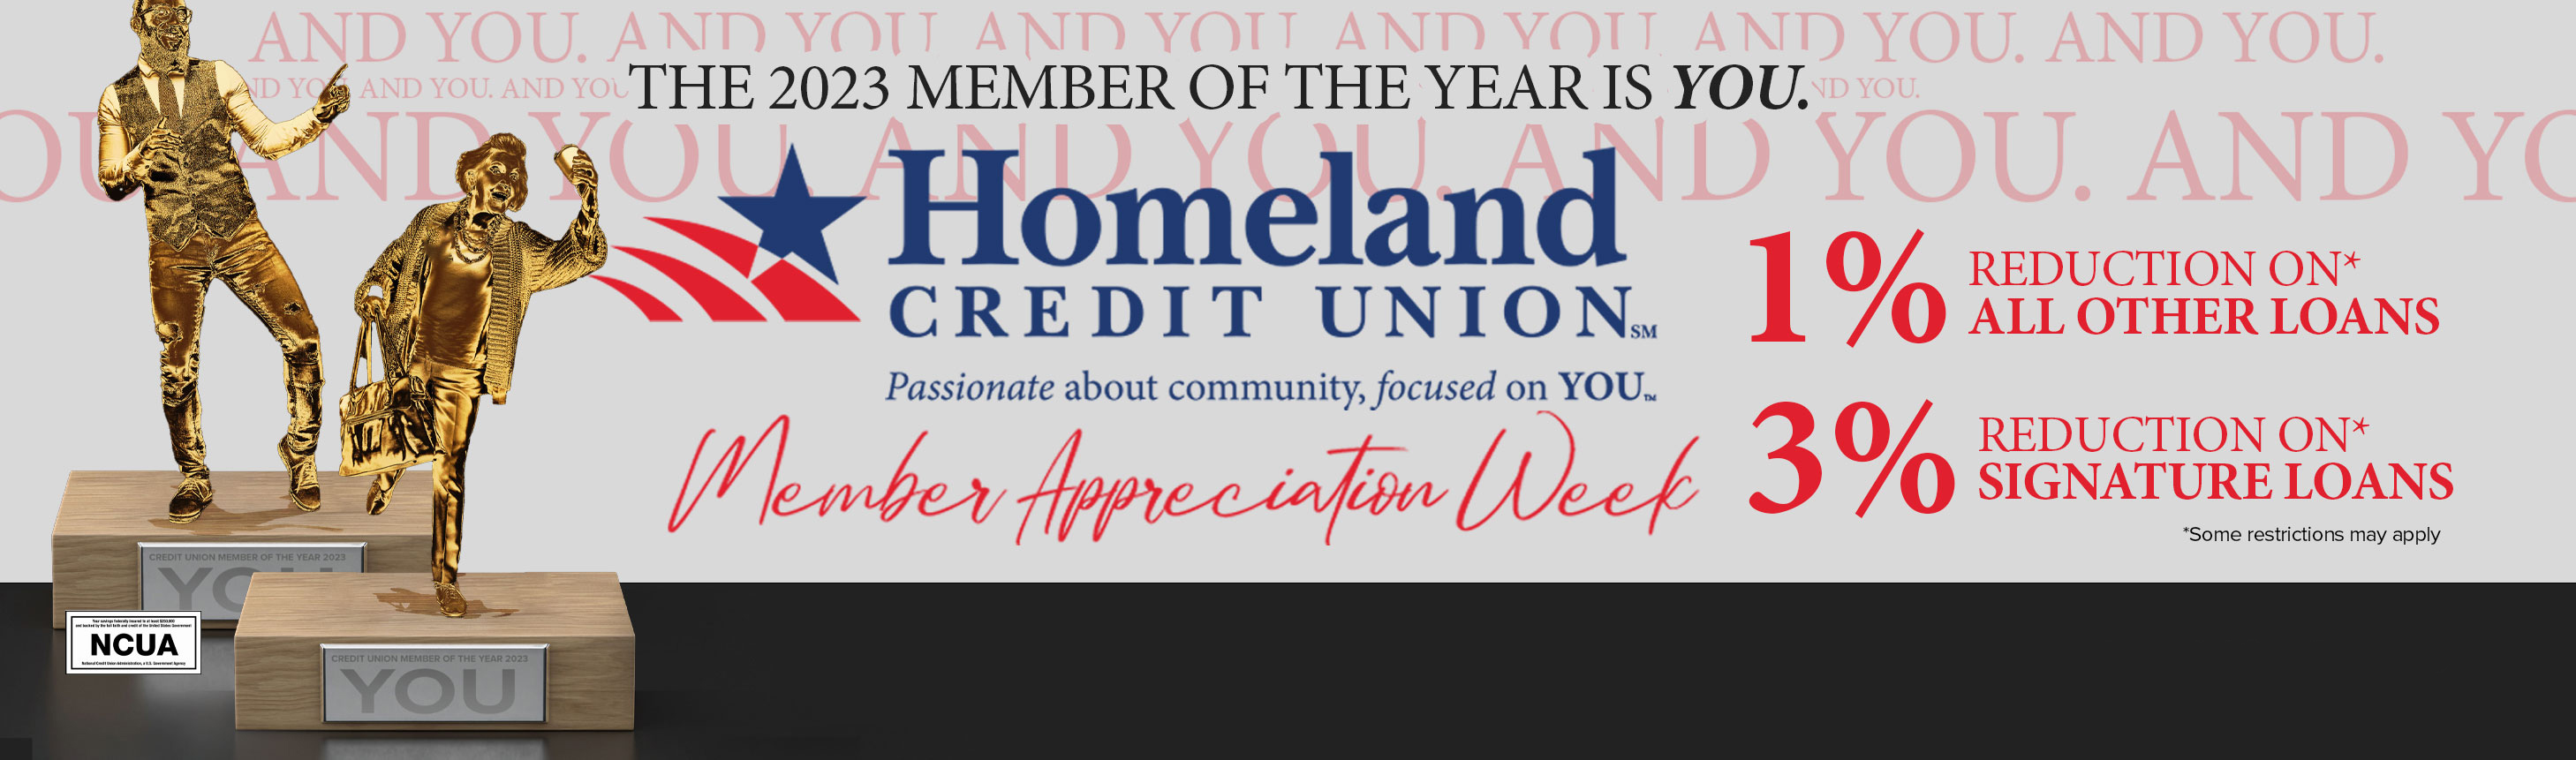 the 2023 member of the year is you. 1% reduction on* all other loans. 3% reduction on* signature loans. *some restrictions apply. Member Appreciation Week. Click for more info